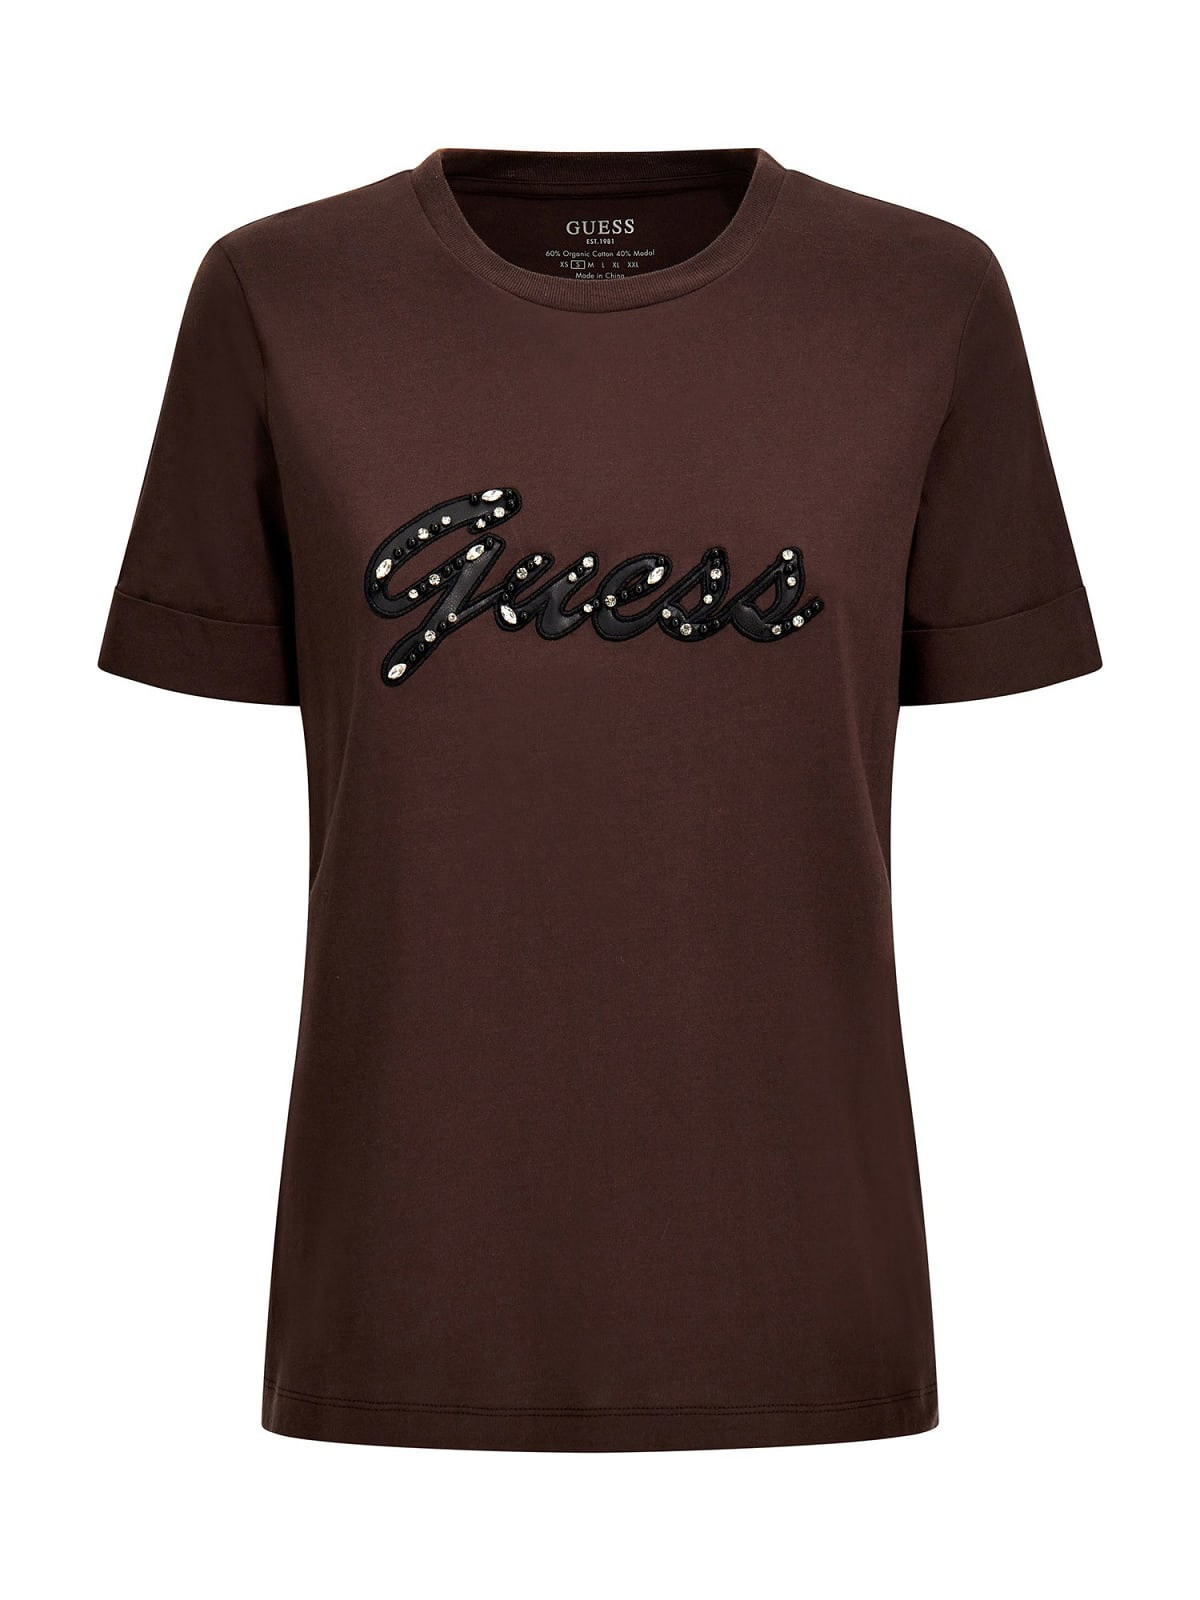 Faux leather logo T-shirt with rhinestones, Brown, large image number 0